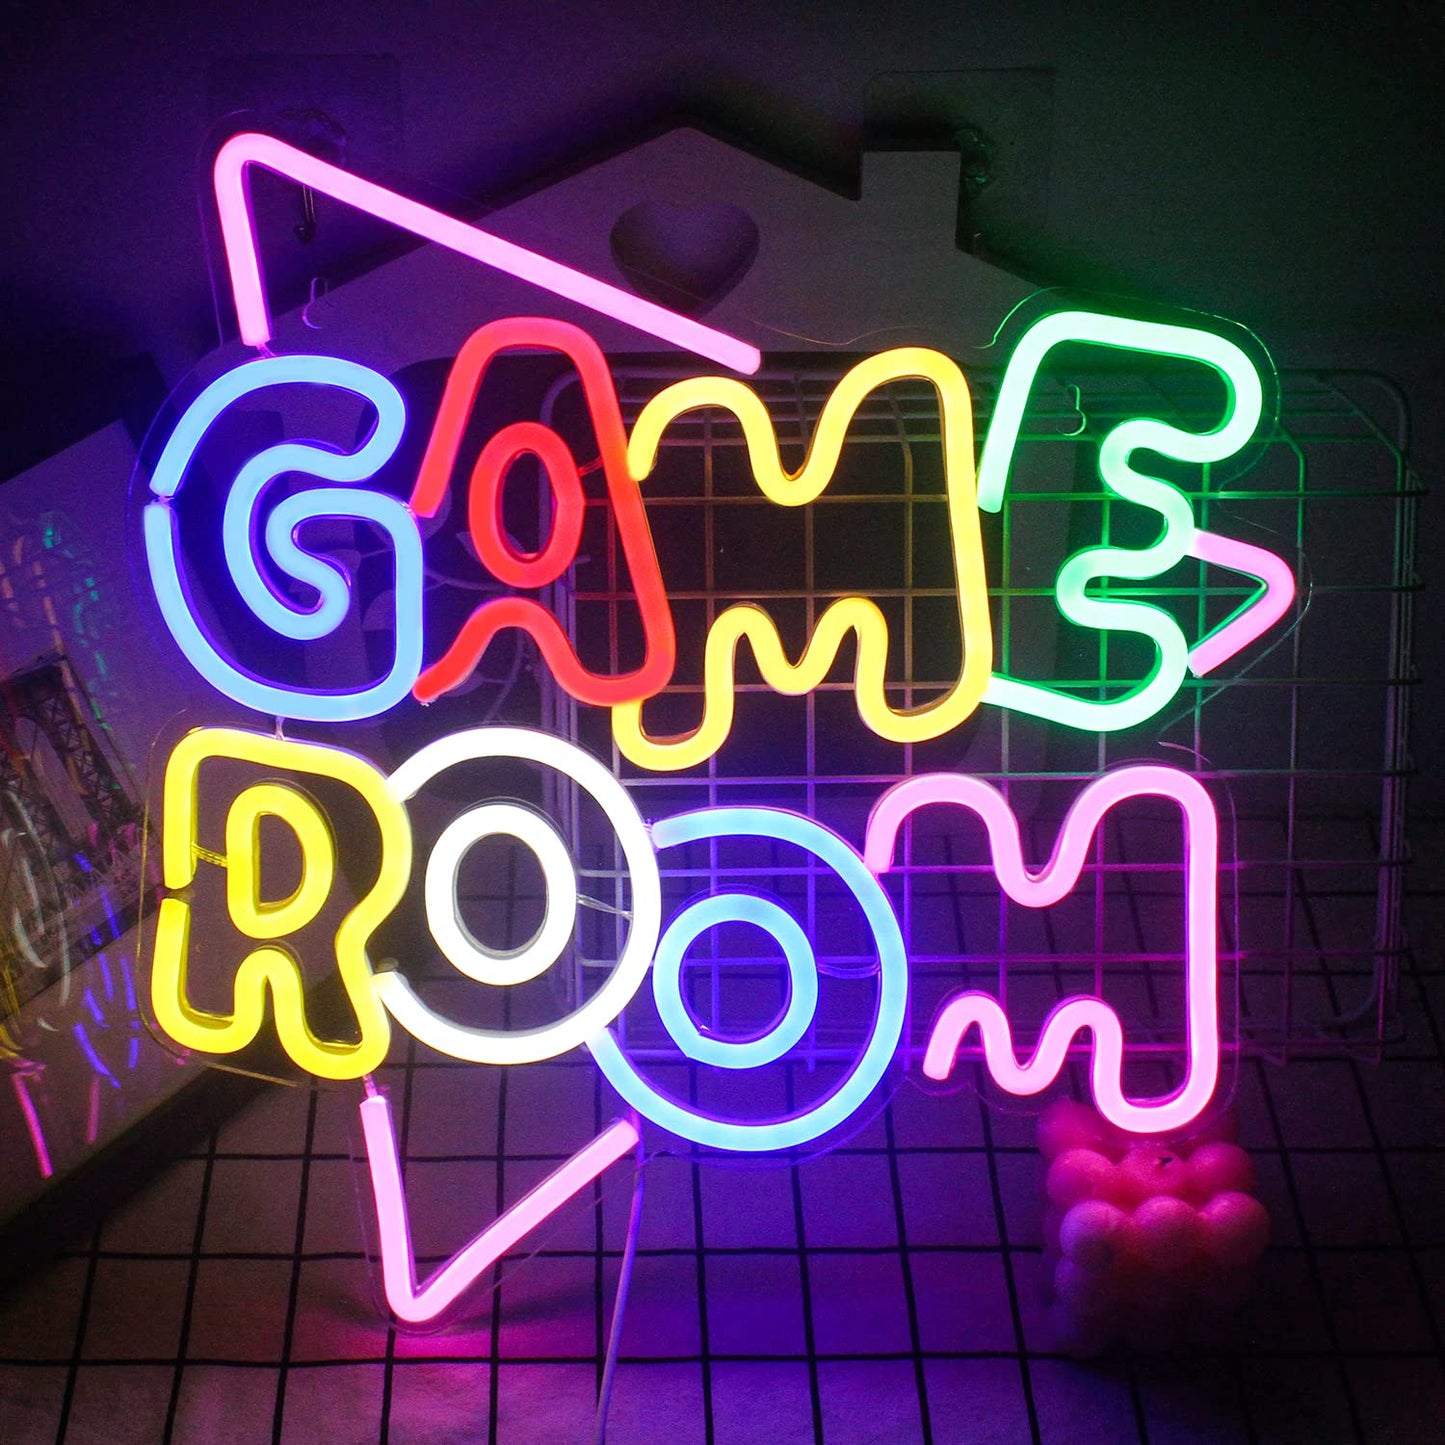 Gamerneon Game Room Large Neon Signs 13.2"x14" Colorful LED ,USB Neon Lights for Game Zone Party Decor Bedroom Gaming Wall Lightup Signs - amzGamess